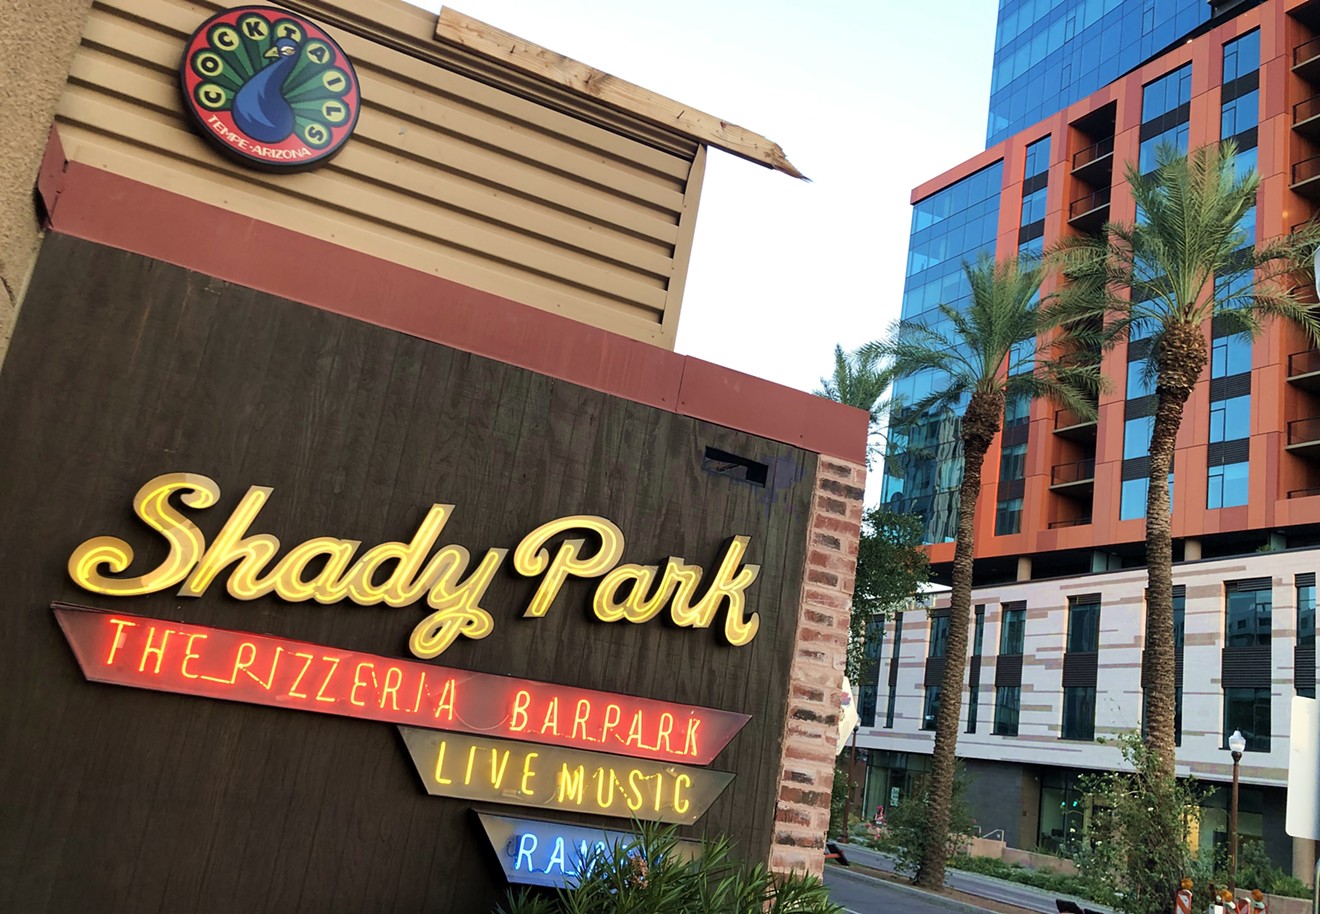 The exterior of Shady Park in Tempe. Mirabella at ASU is in the background.